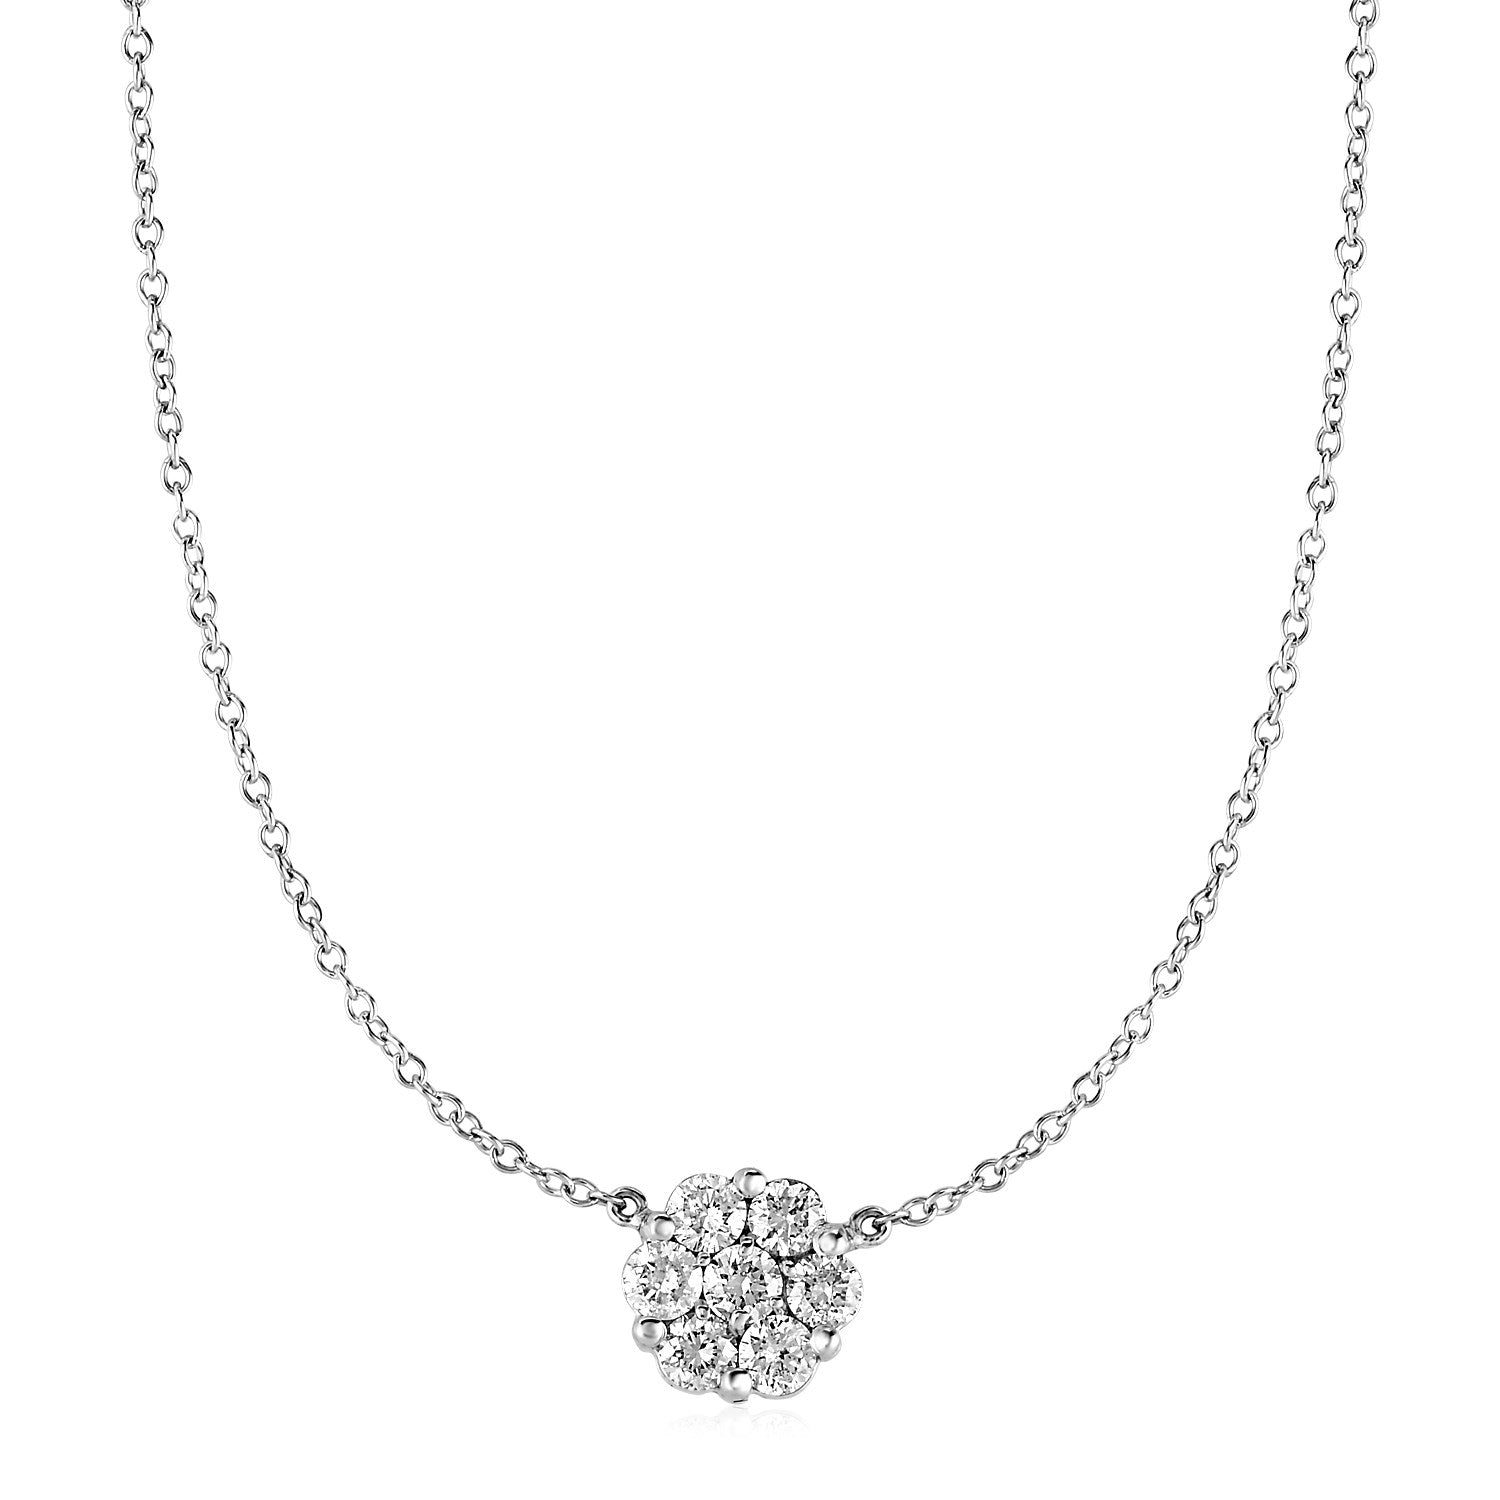 14k White Gold Necklace with Round Pendant with White Diamonds